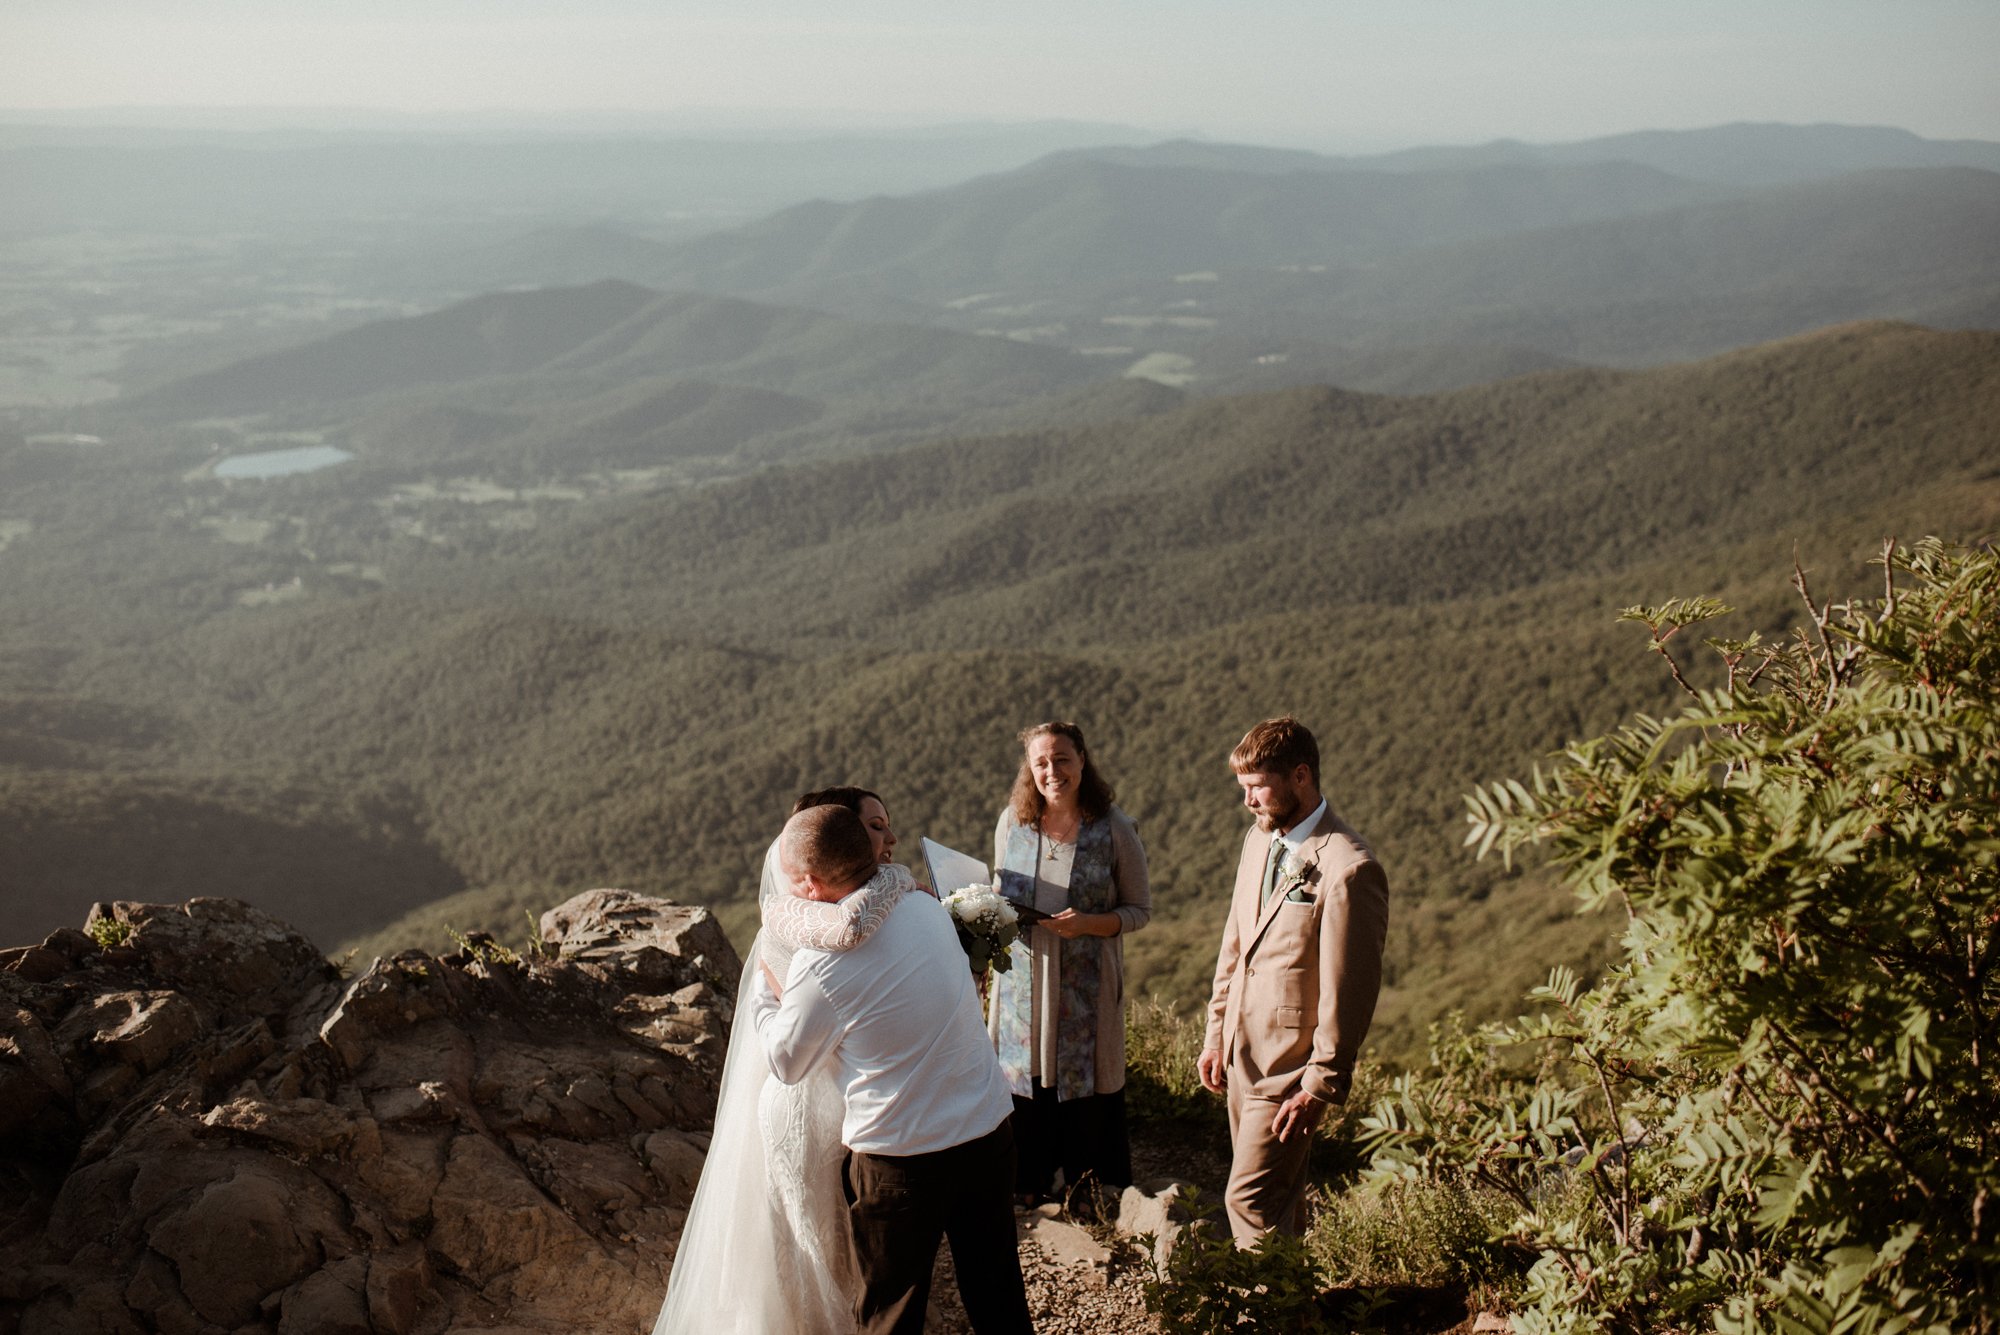 Sunset Elopement on Stony Man Summit in Shenandoah National Park - White Sails Creative Elopement Photography - July Elopement on the Blue Ridge Parkway_20.jpg